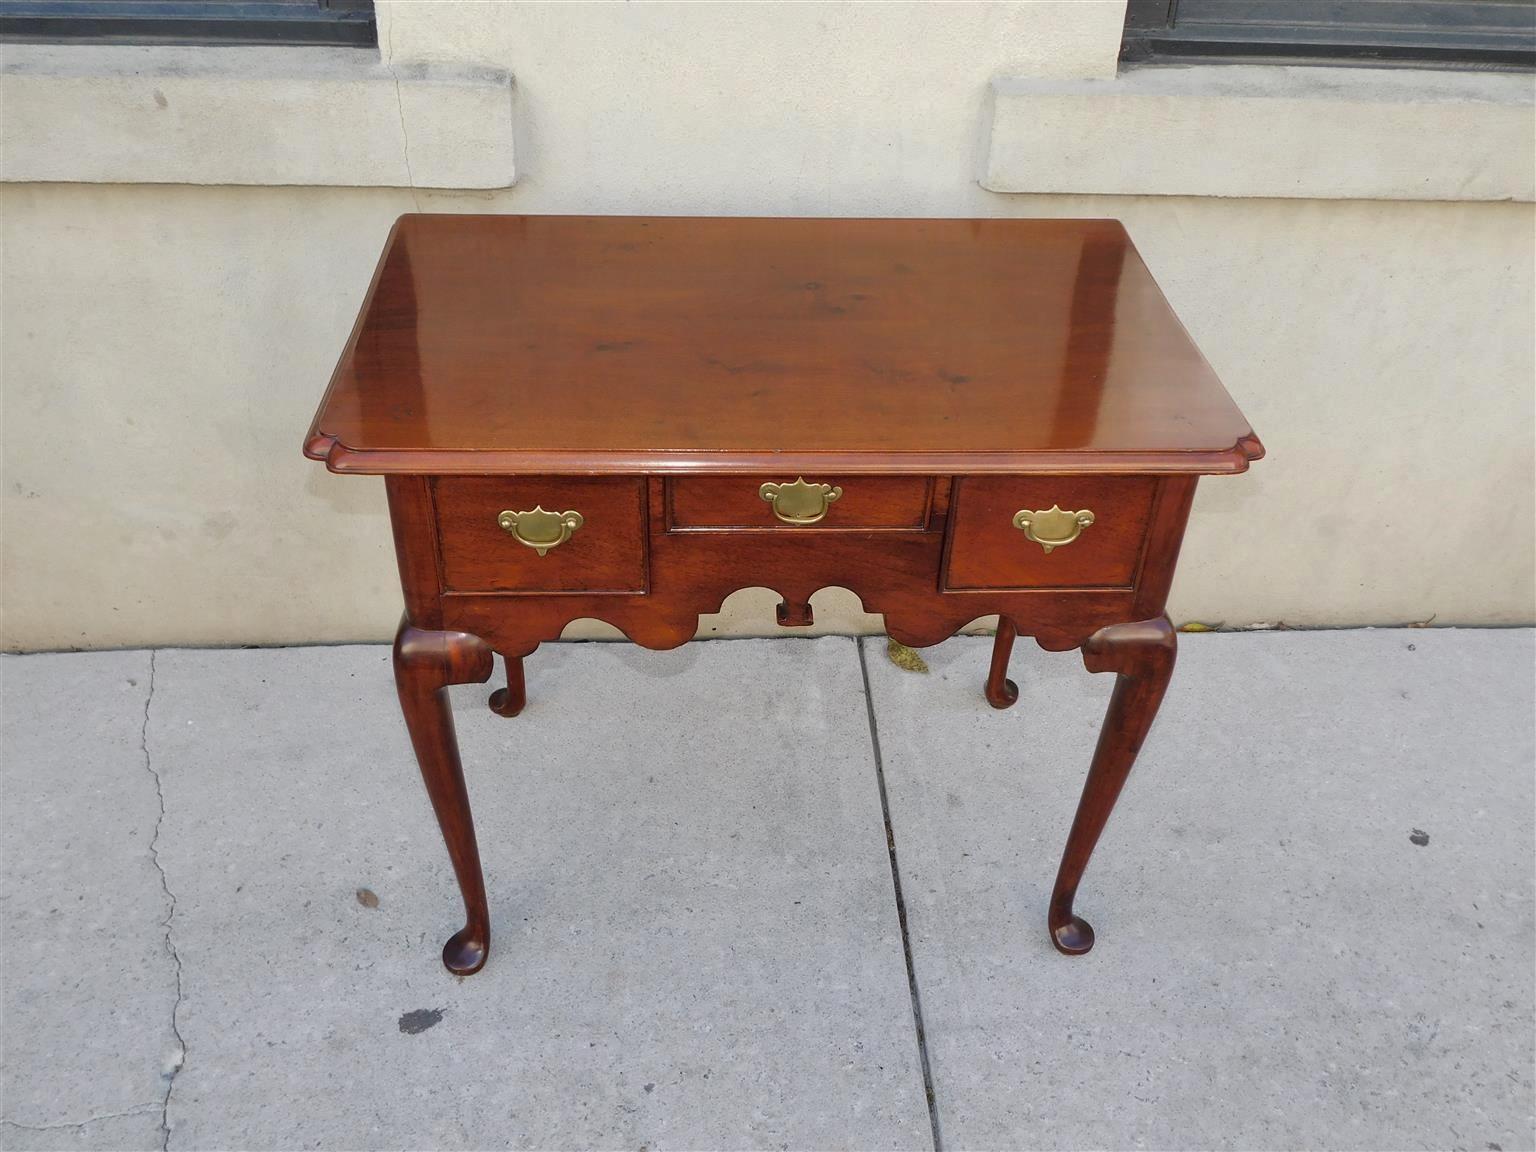 English Queen Anne Walnut three drawer lowboy with an incised molded edge top, carved scalloped skirt, original brasses, and resting on cabriole legs with pad feet, Early 18th Century